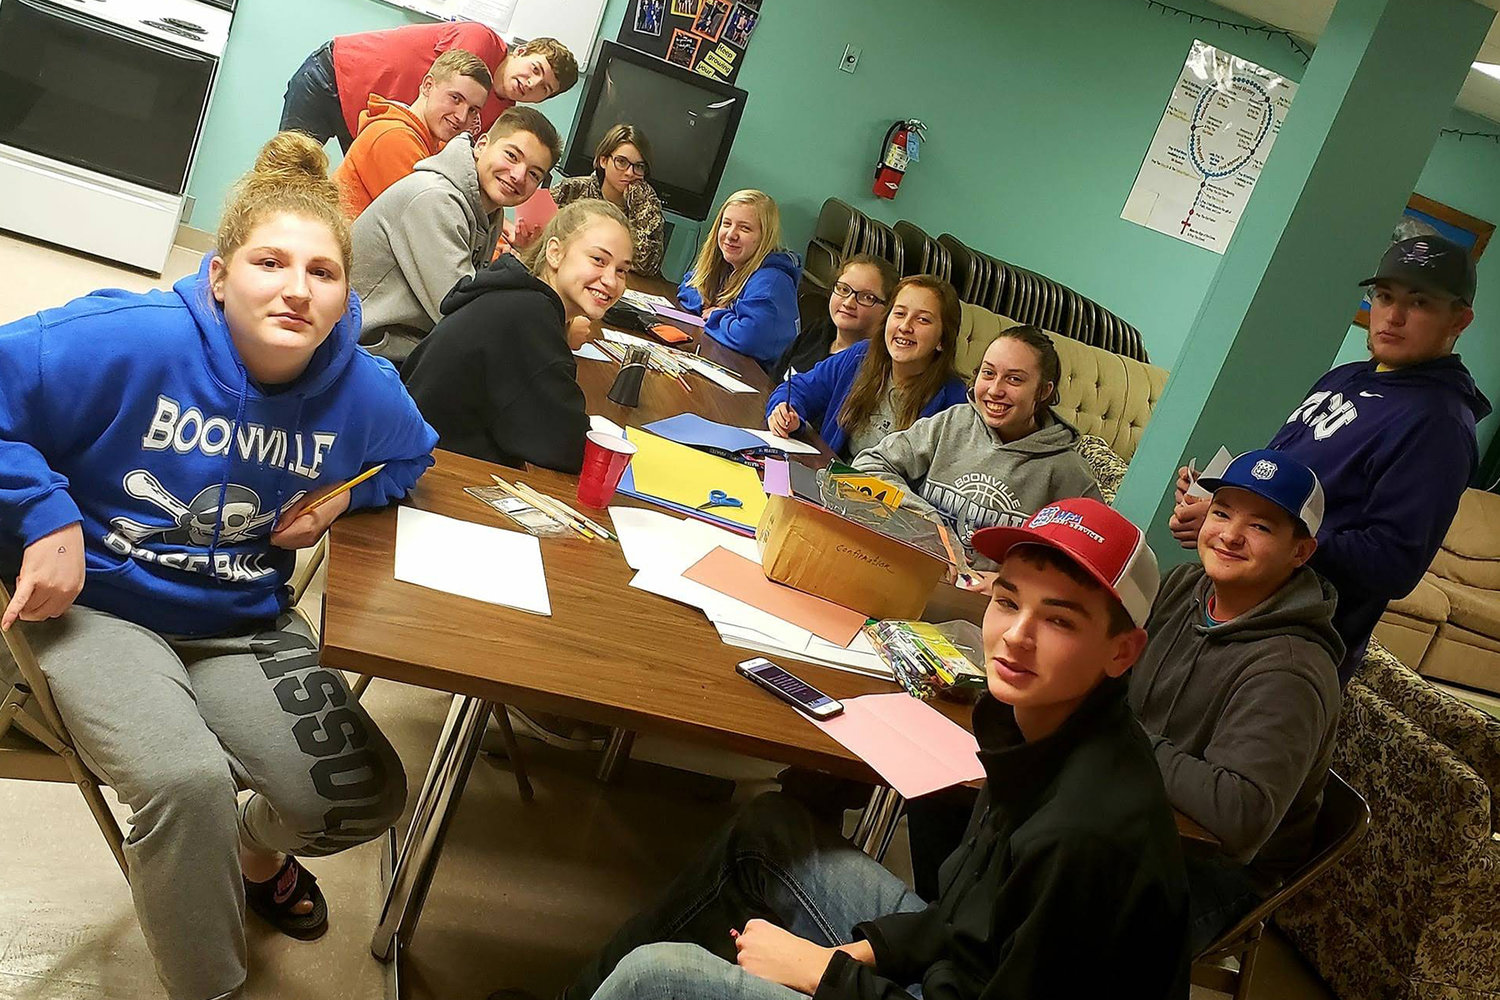 Members of the “Juvies for Jesus” high school youth group at Ss. Peter & Paul parish in Boonville make Christmas cards to send to the diocese’s seminarians in this December 2018 photo.